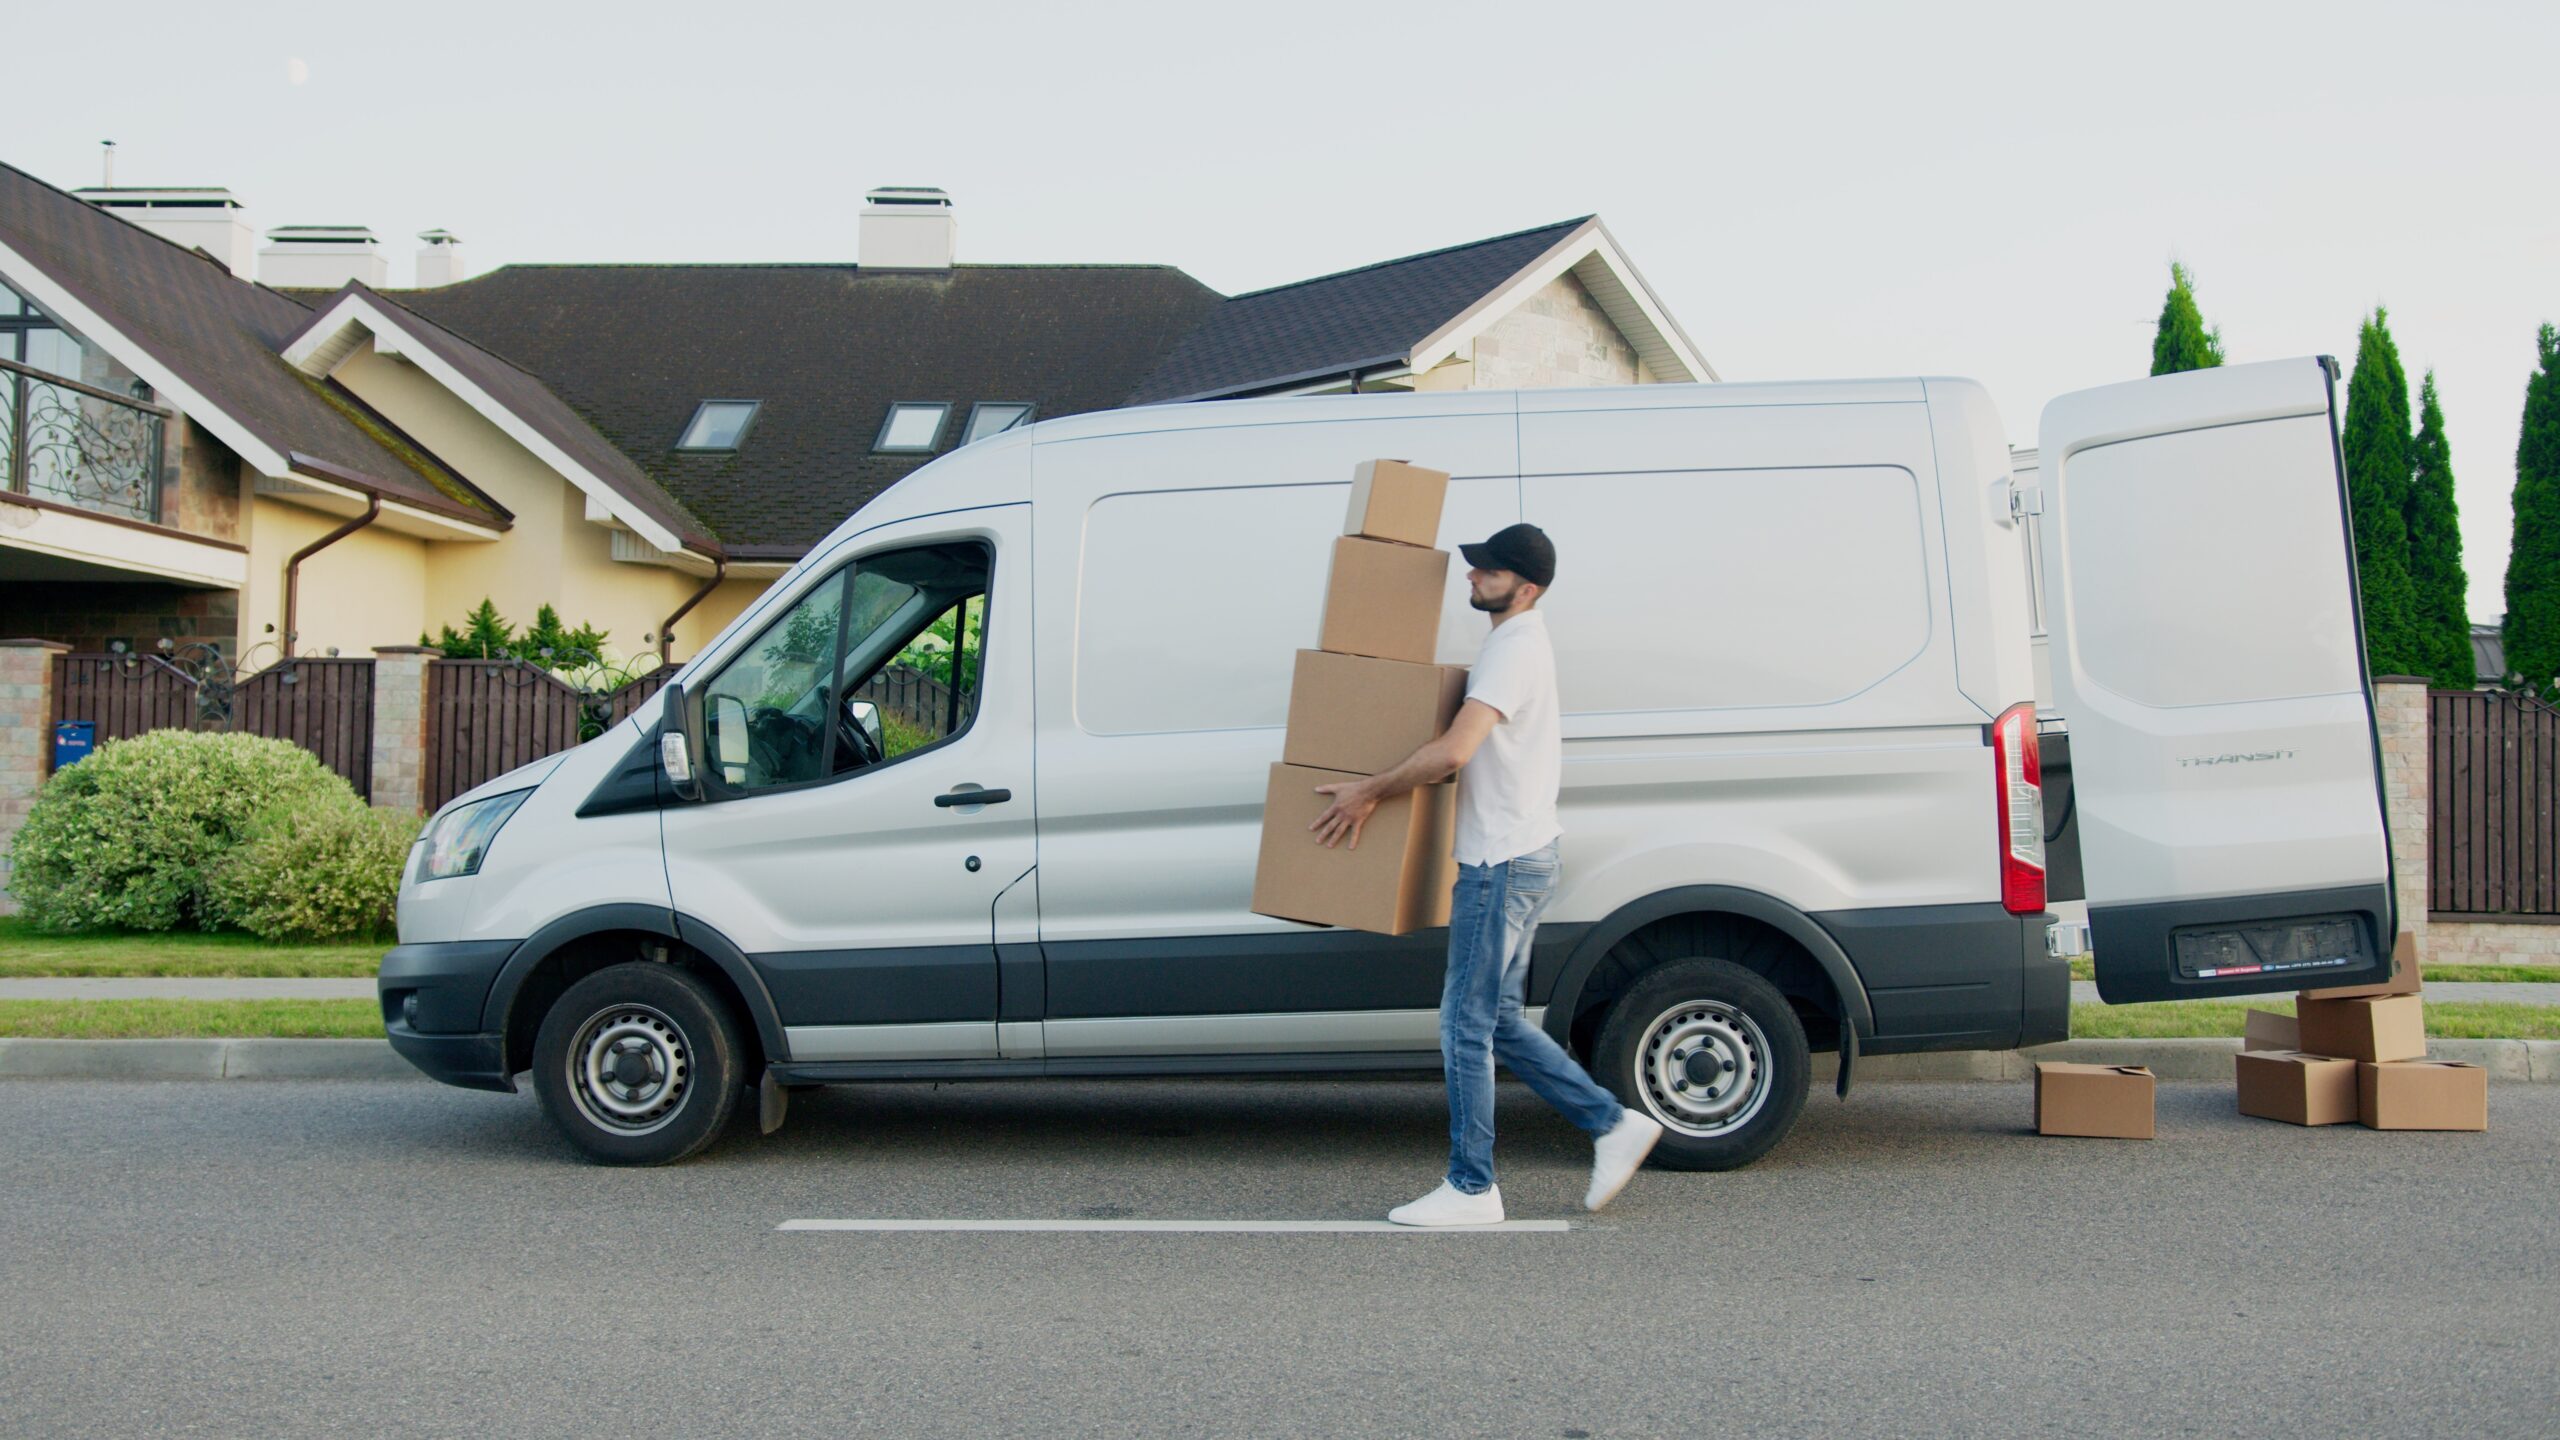 Moving House? Here’s Our Top 5 Moving Tips